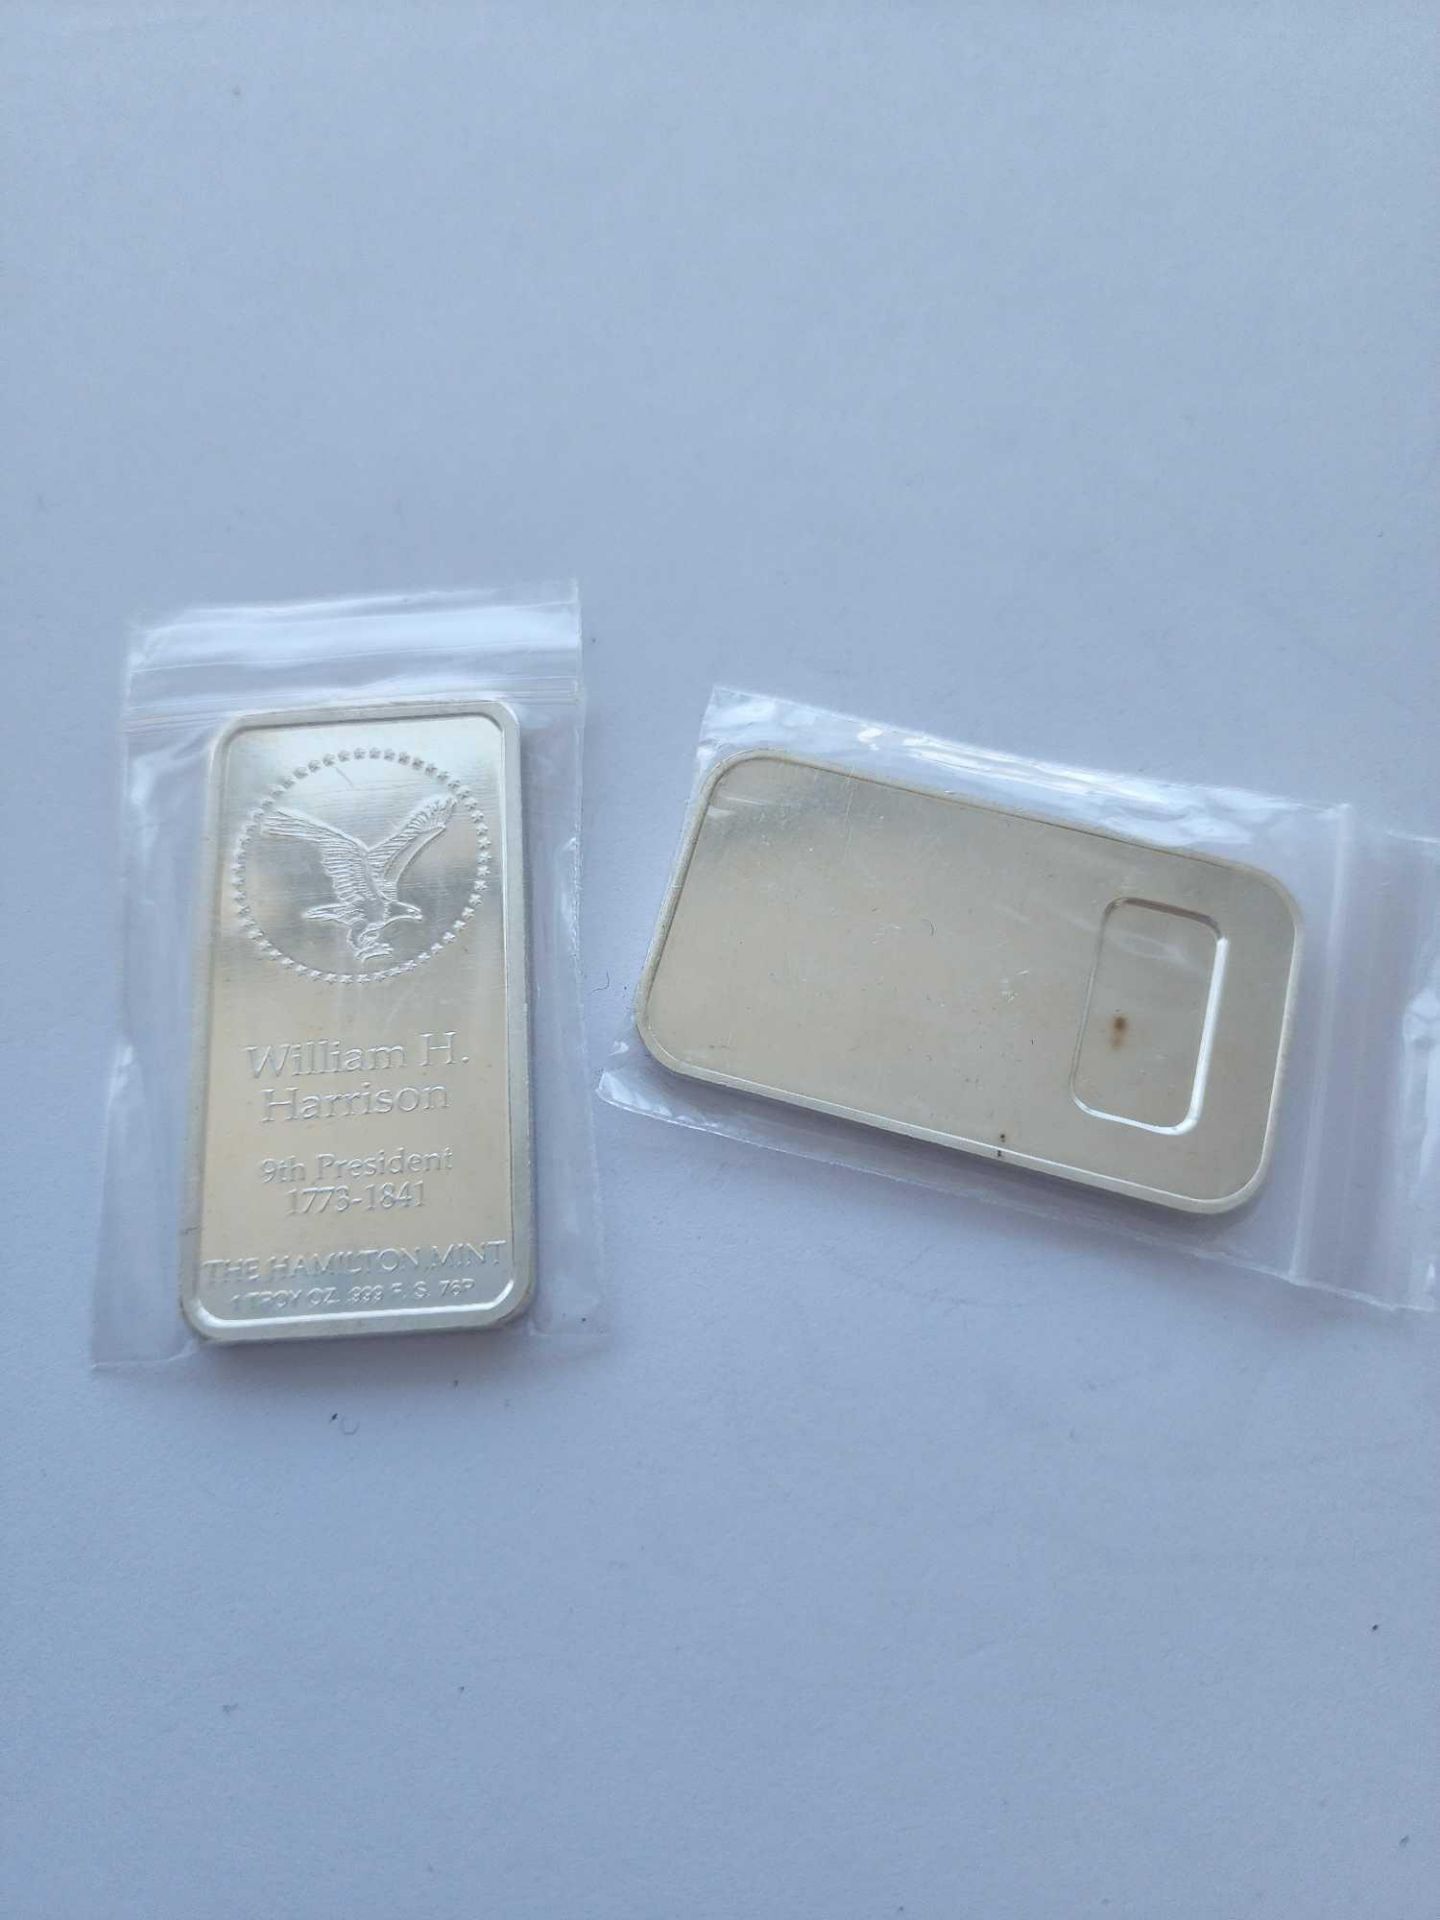 2 president silver bars - Image 4 of 4